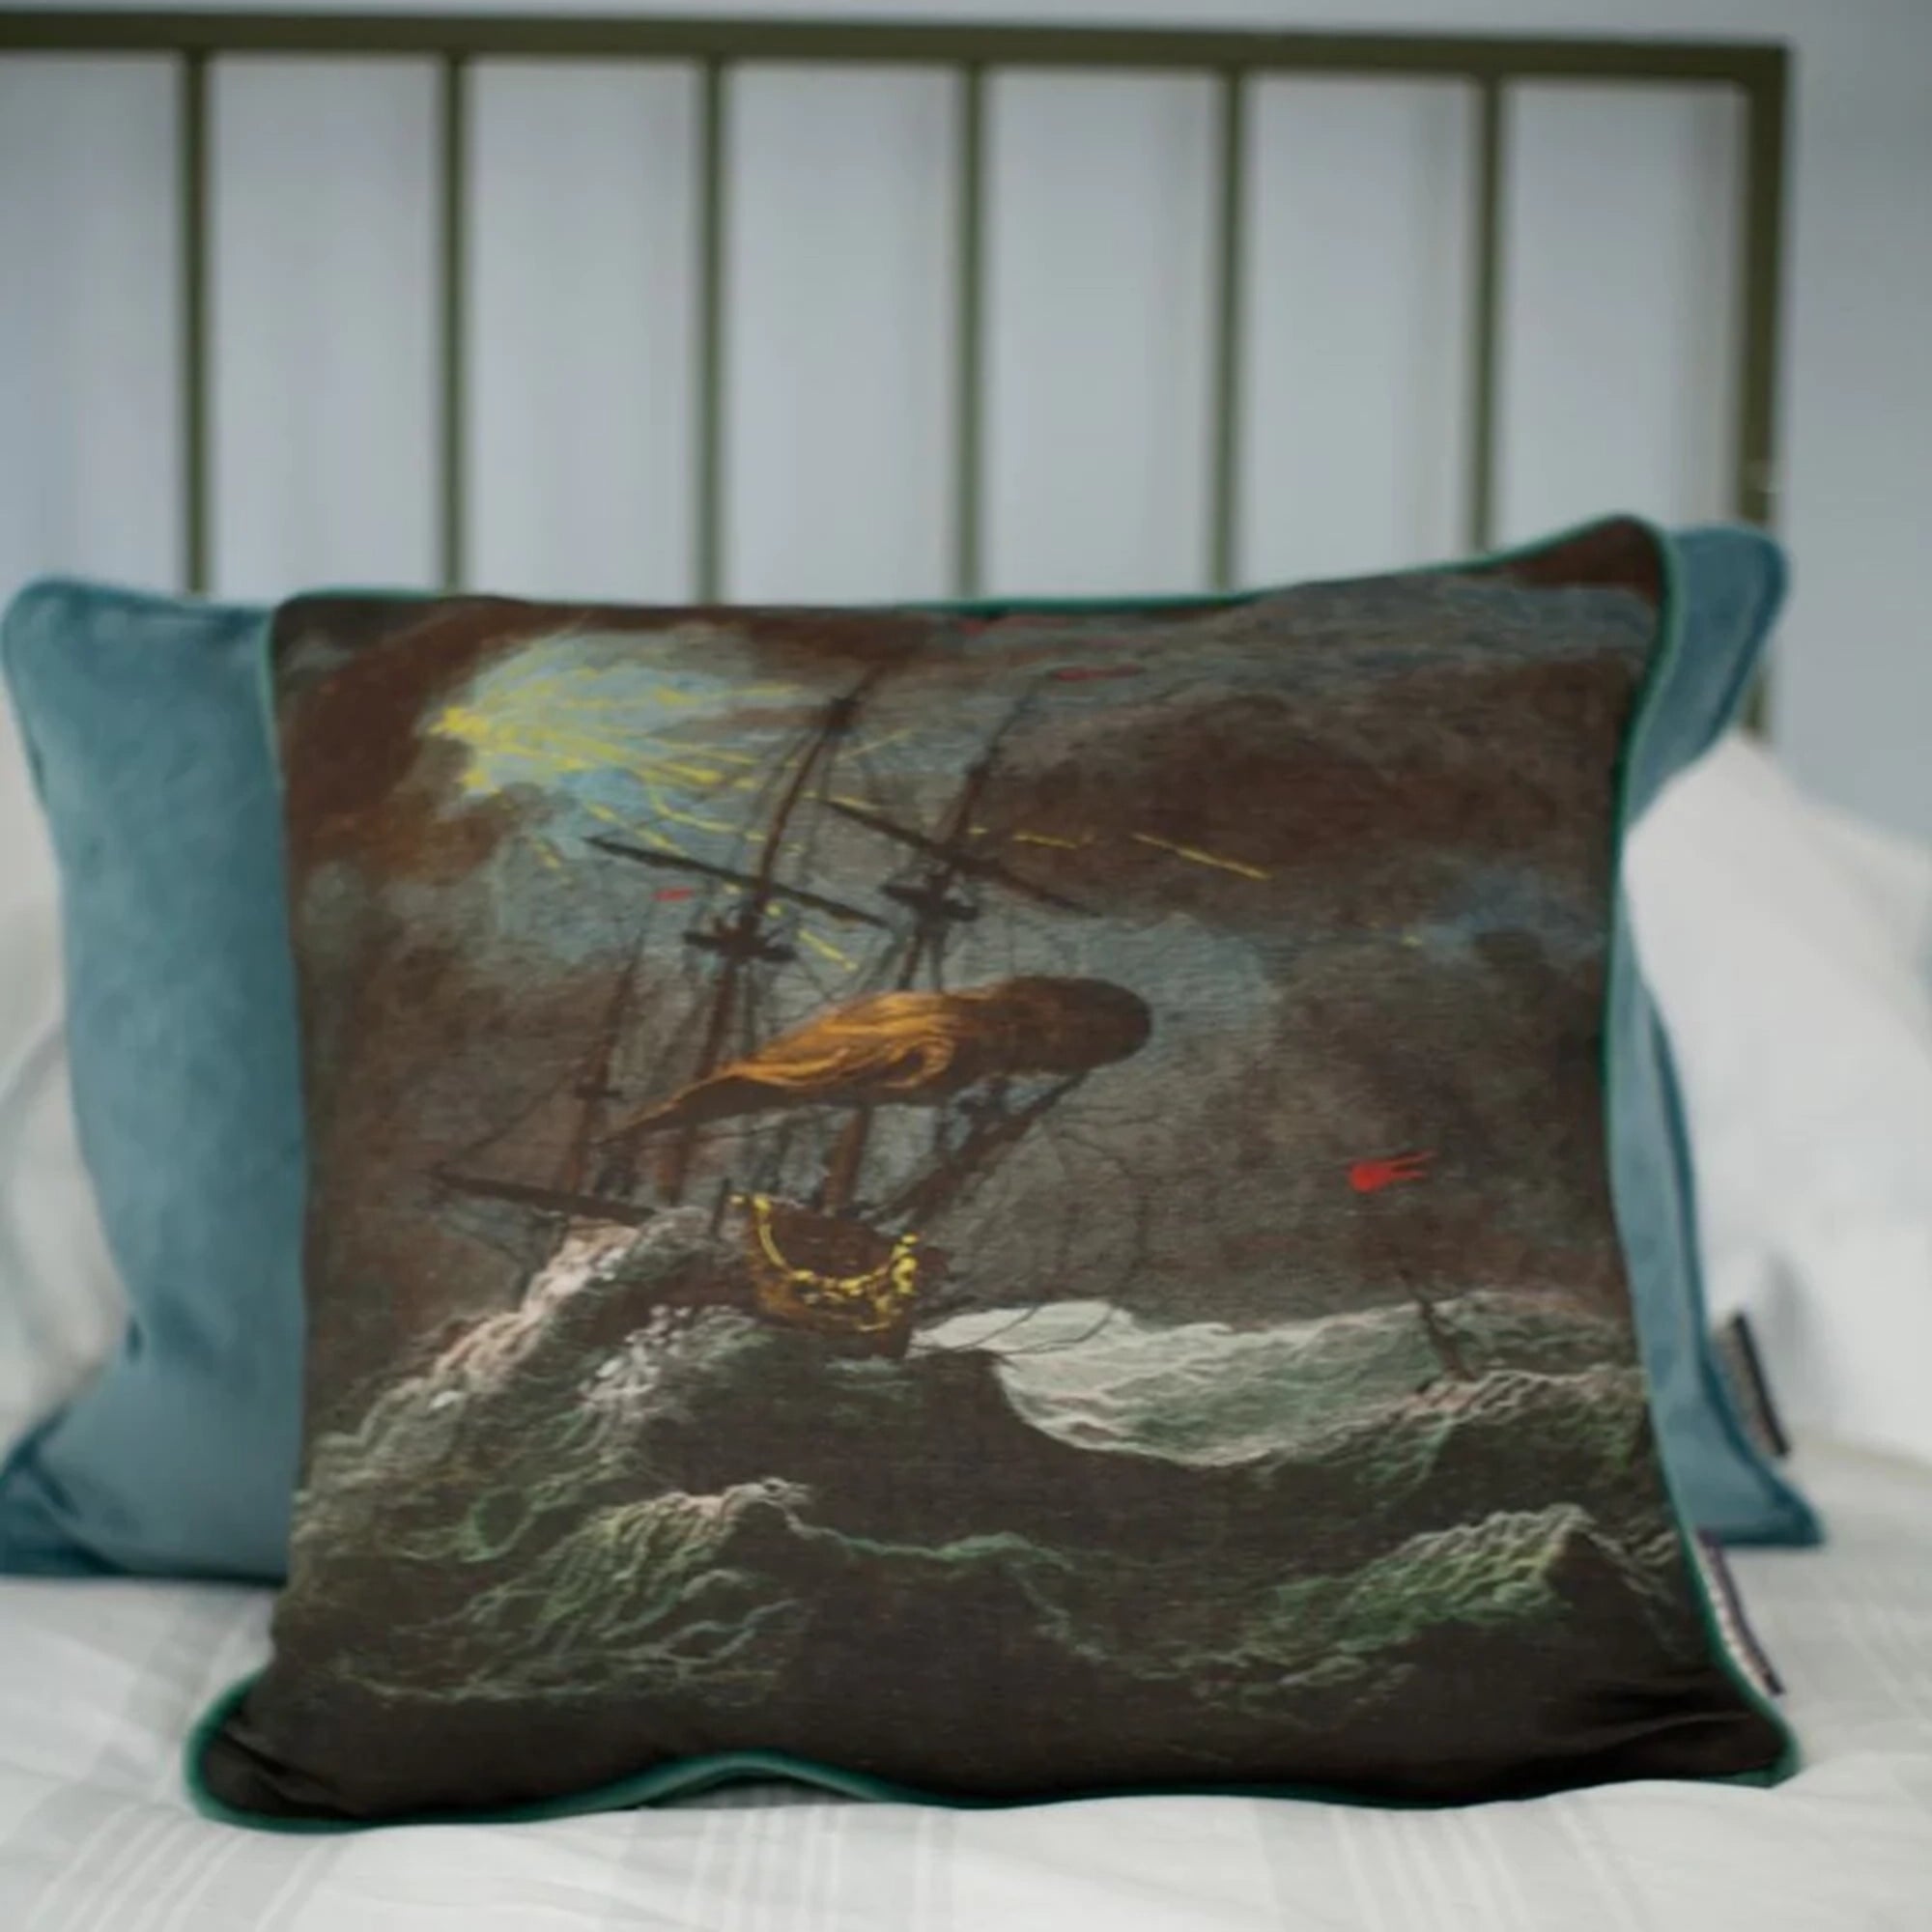 Shipwreck night scene with rough seas and lightening placed on a bed